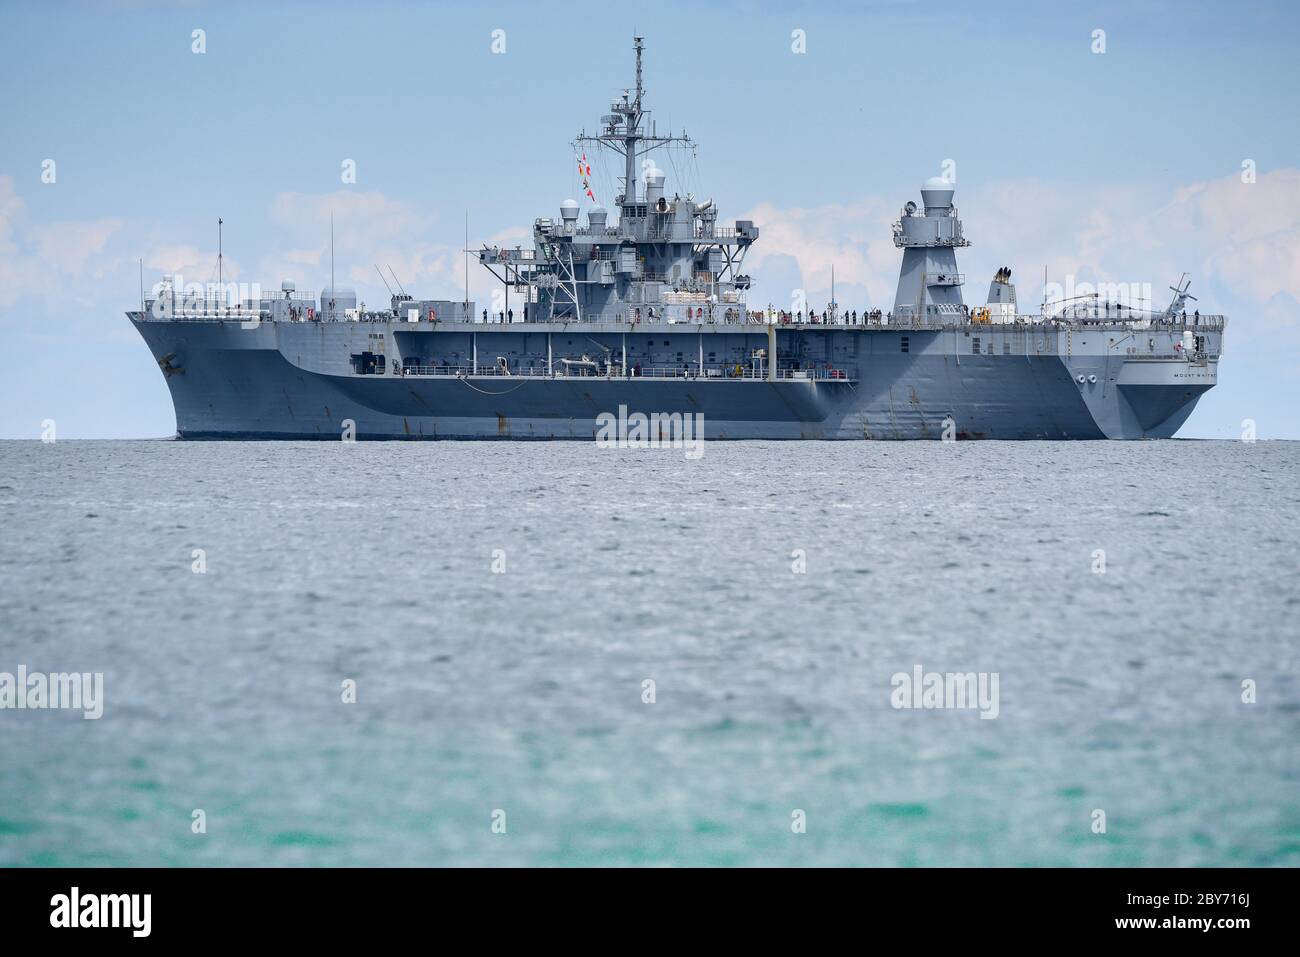 June 5, 2020, the USS Mount Whitney (LCC-20), a command ship for the United States Navy's amphibious warfare and the second Blue Ridge-class ship. It is named after Mount Whitney and has served in the U.S. Navy since 1971, and has been part of the Military Sealift Command since 2004. It is based in Gaeta, Italy and serves as the flagship for the commander of the 6th U.S. fleet. The ship leaving Kiel during the NATO maneuver BALTOPS. | usage worldwide Stock Photo